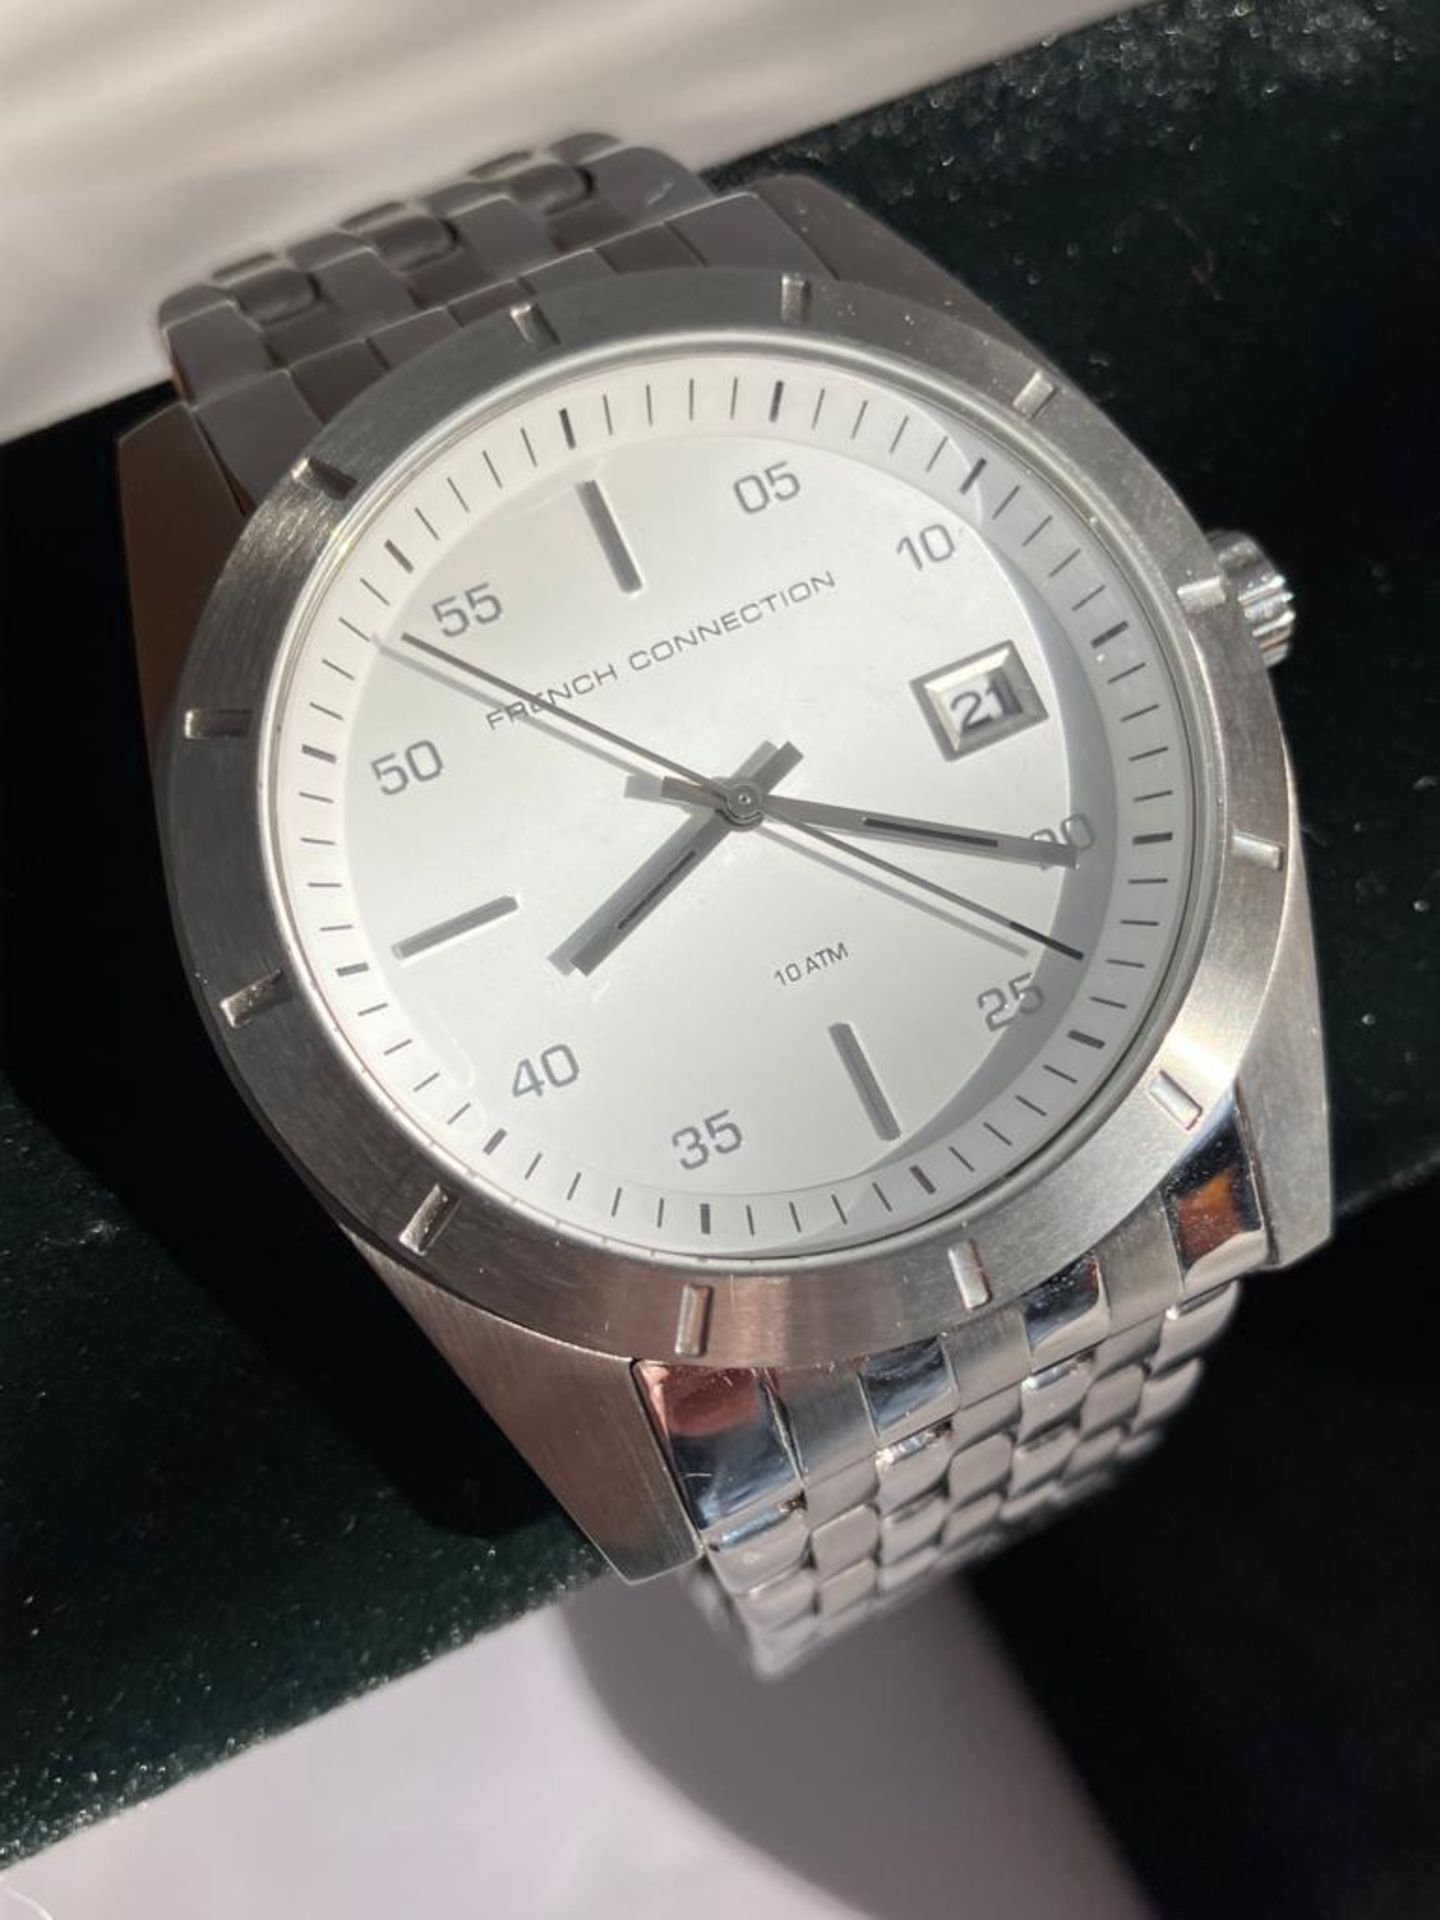 Gentlemans FRENCH CONNECTION WRISTWATCH Model FC1159SM. Finished in stainless steel Silver tone.